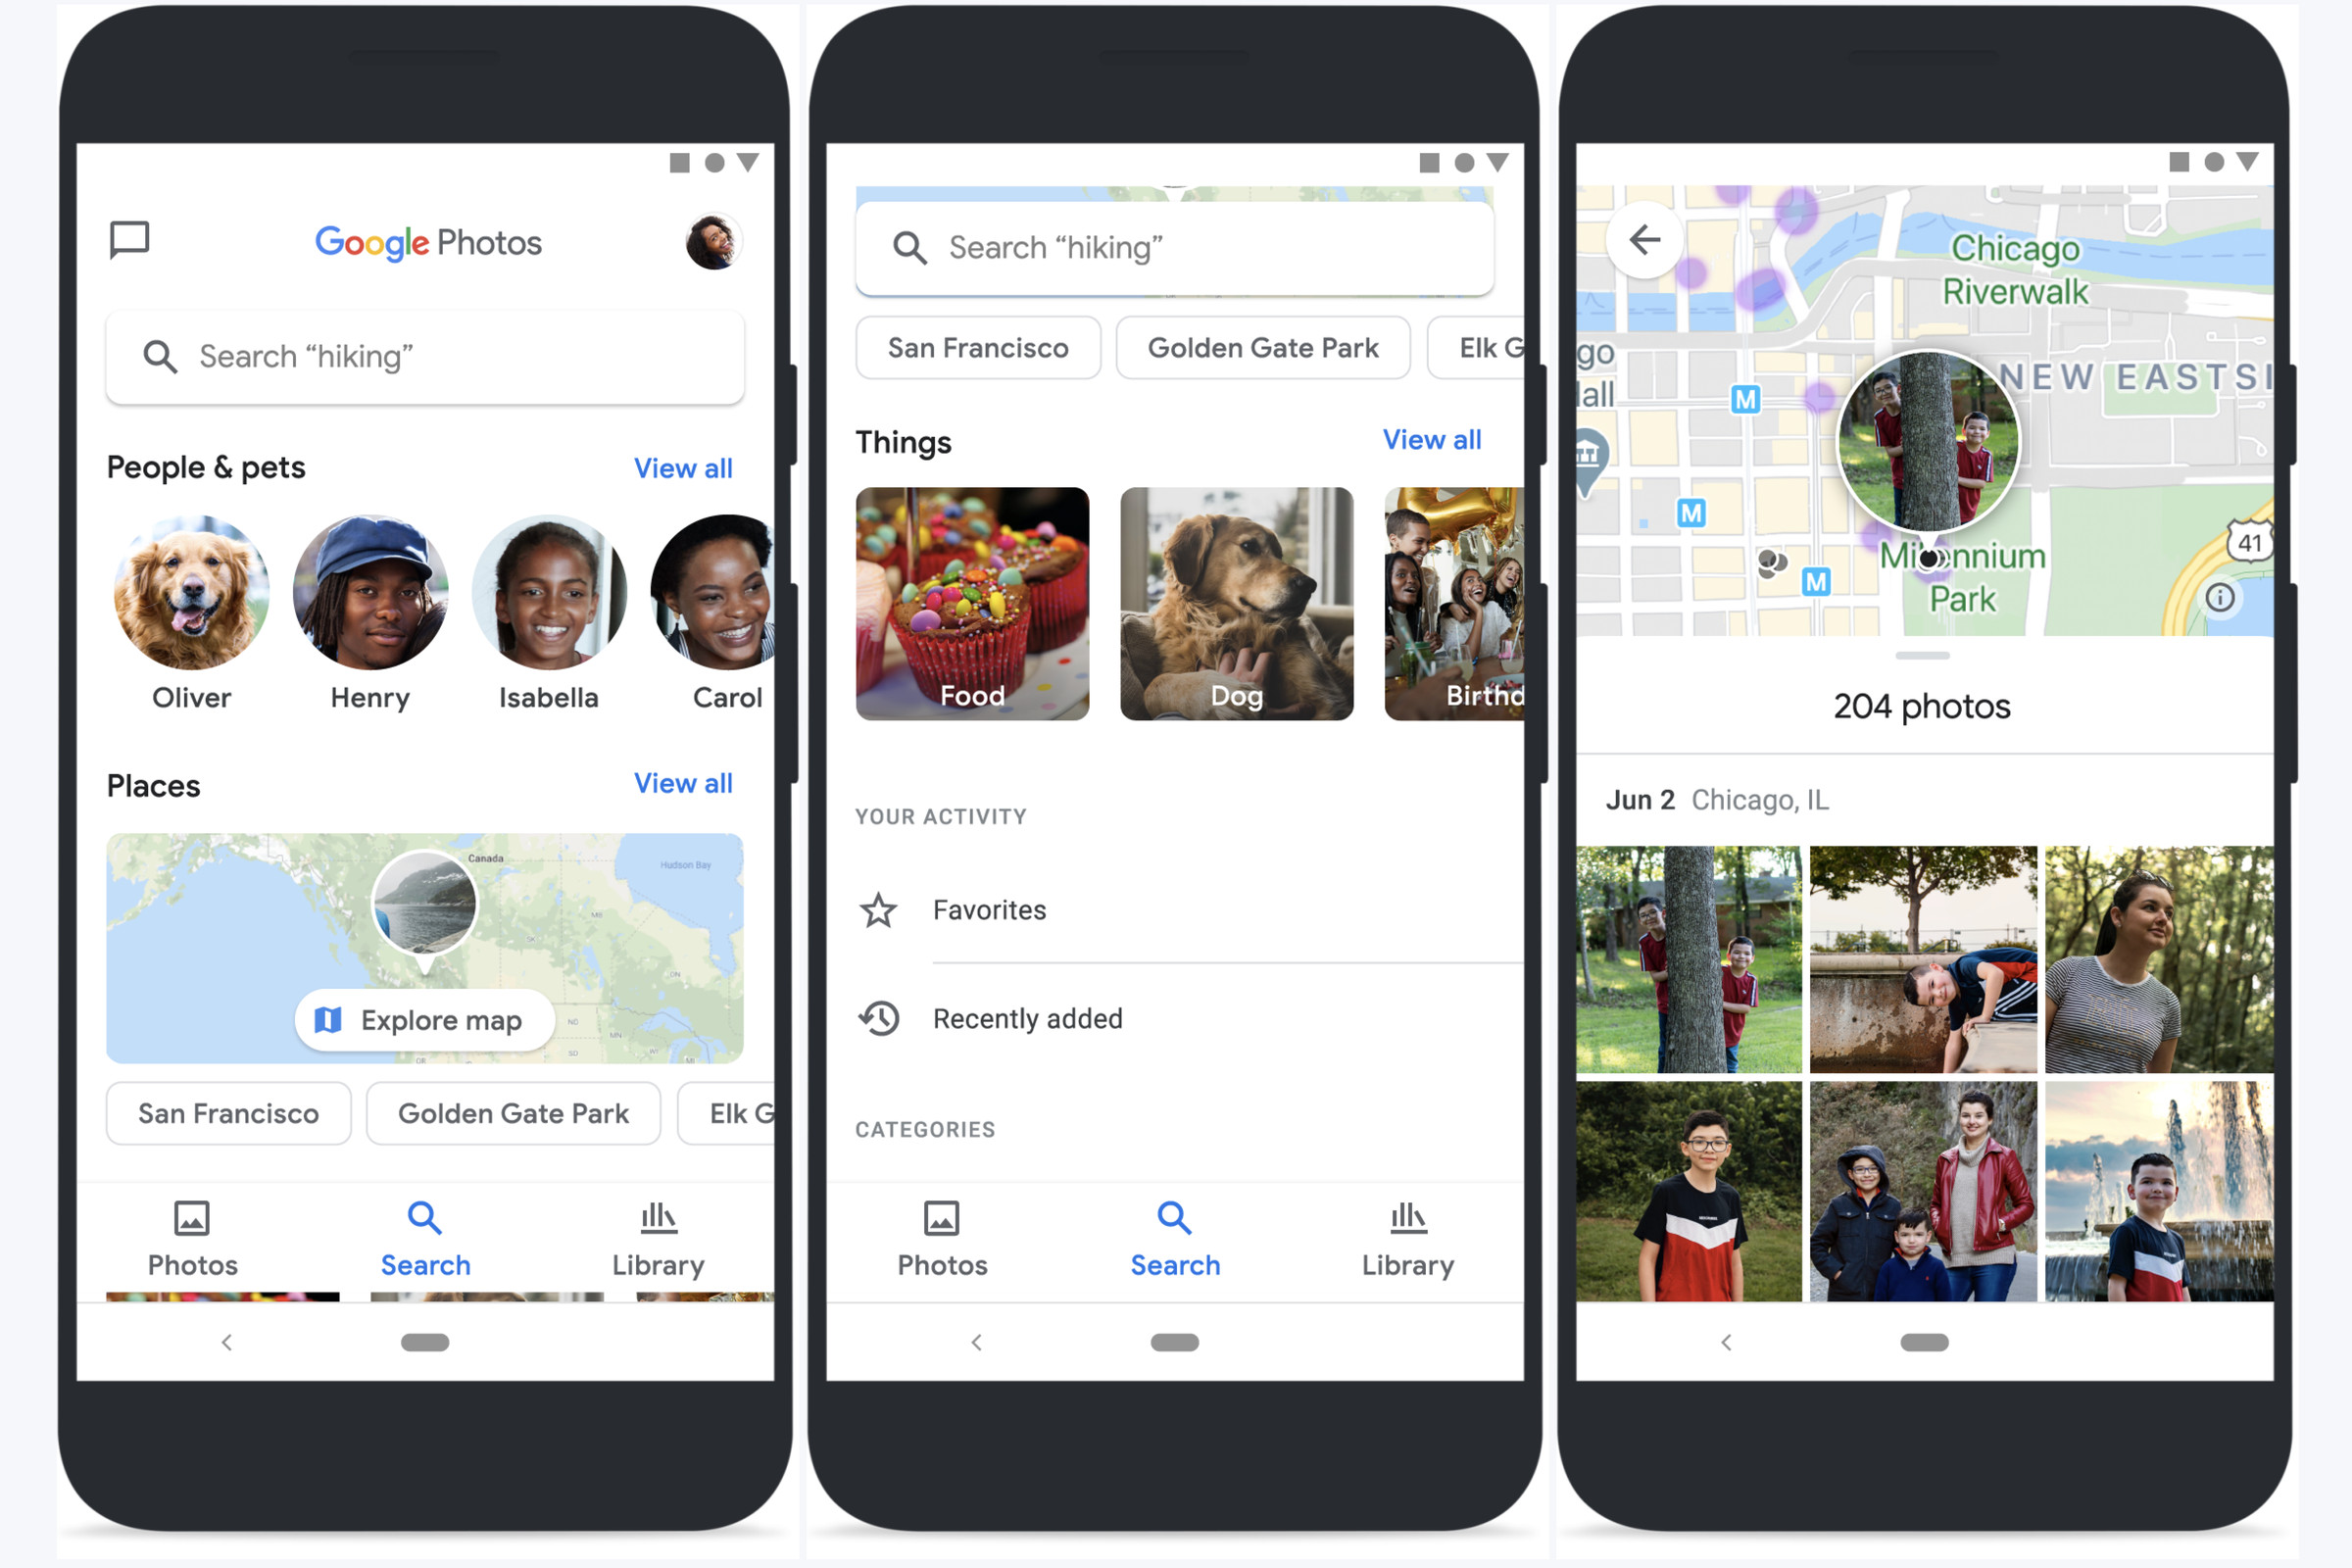 Three images demonstrating the new search interface in Google Photos for iOS and Android.